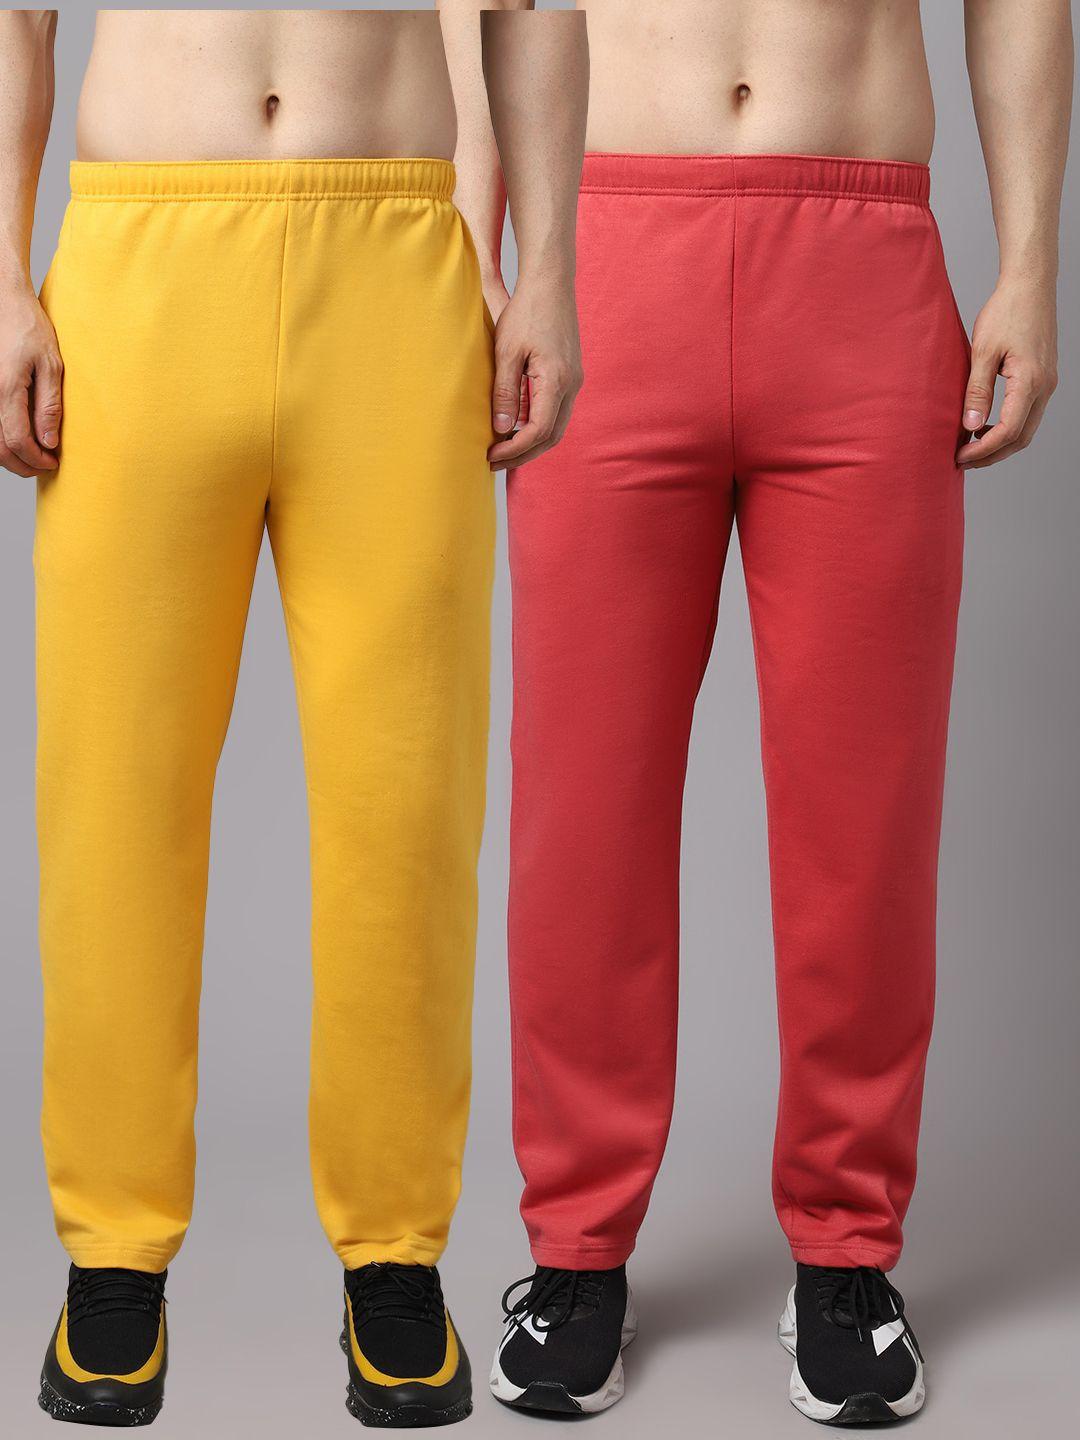 vimal jonney men pack of 2 red & yellow solid cotton track pants